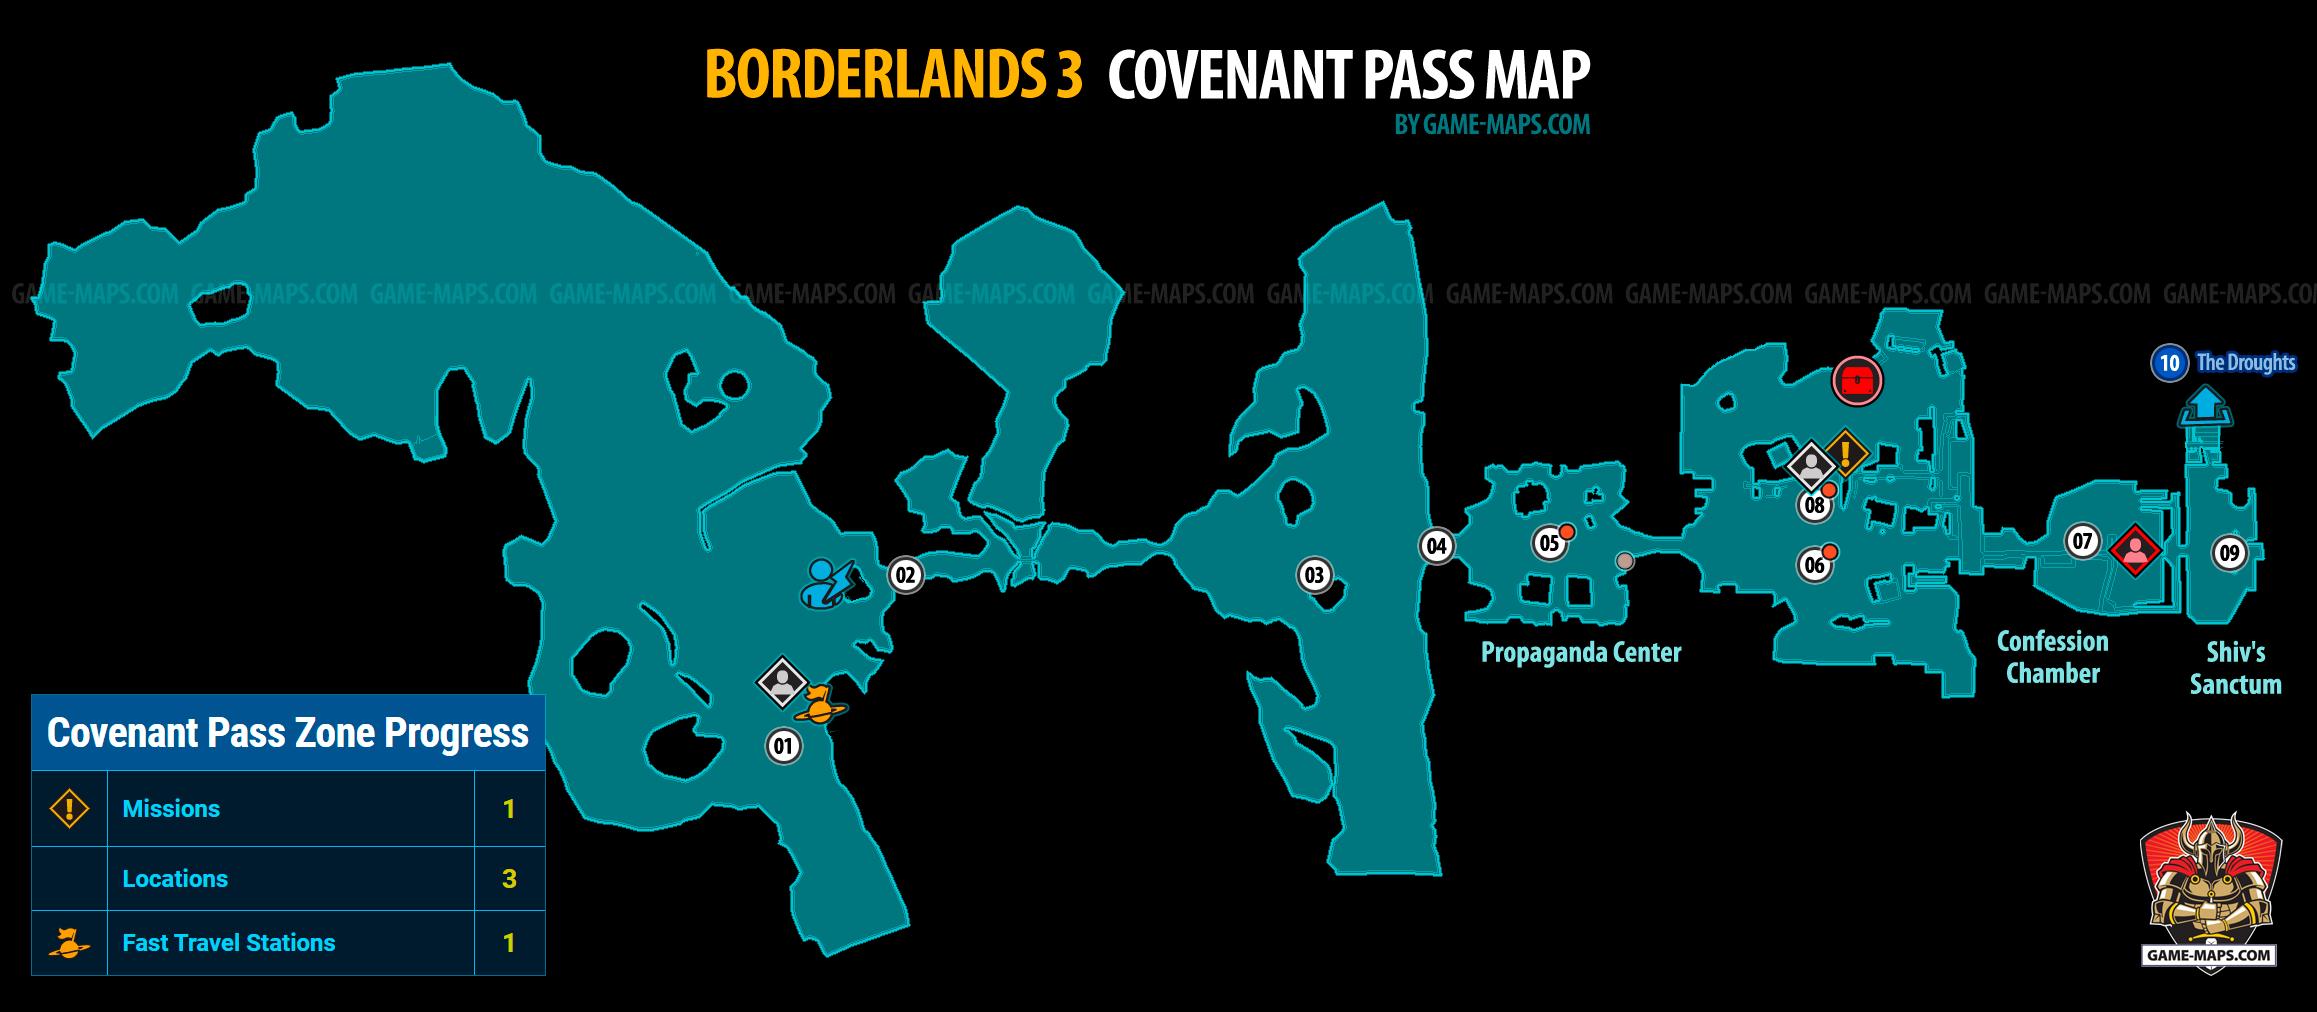 Covenant Pass Map on Pandora Planet for Borderlands 3